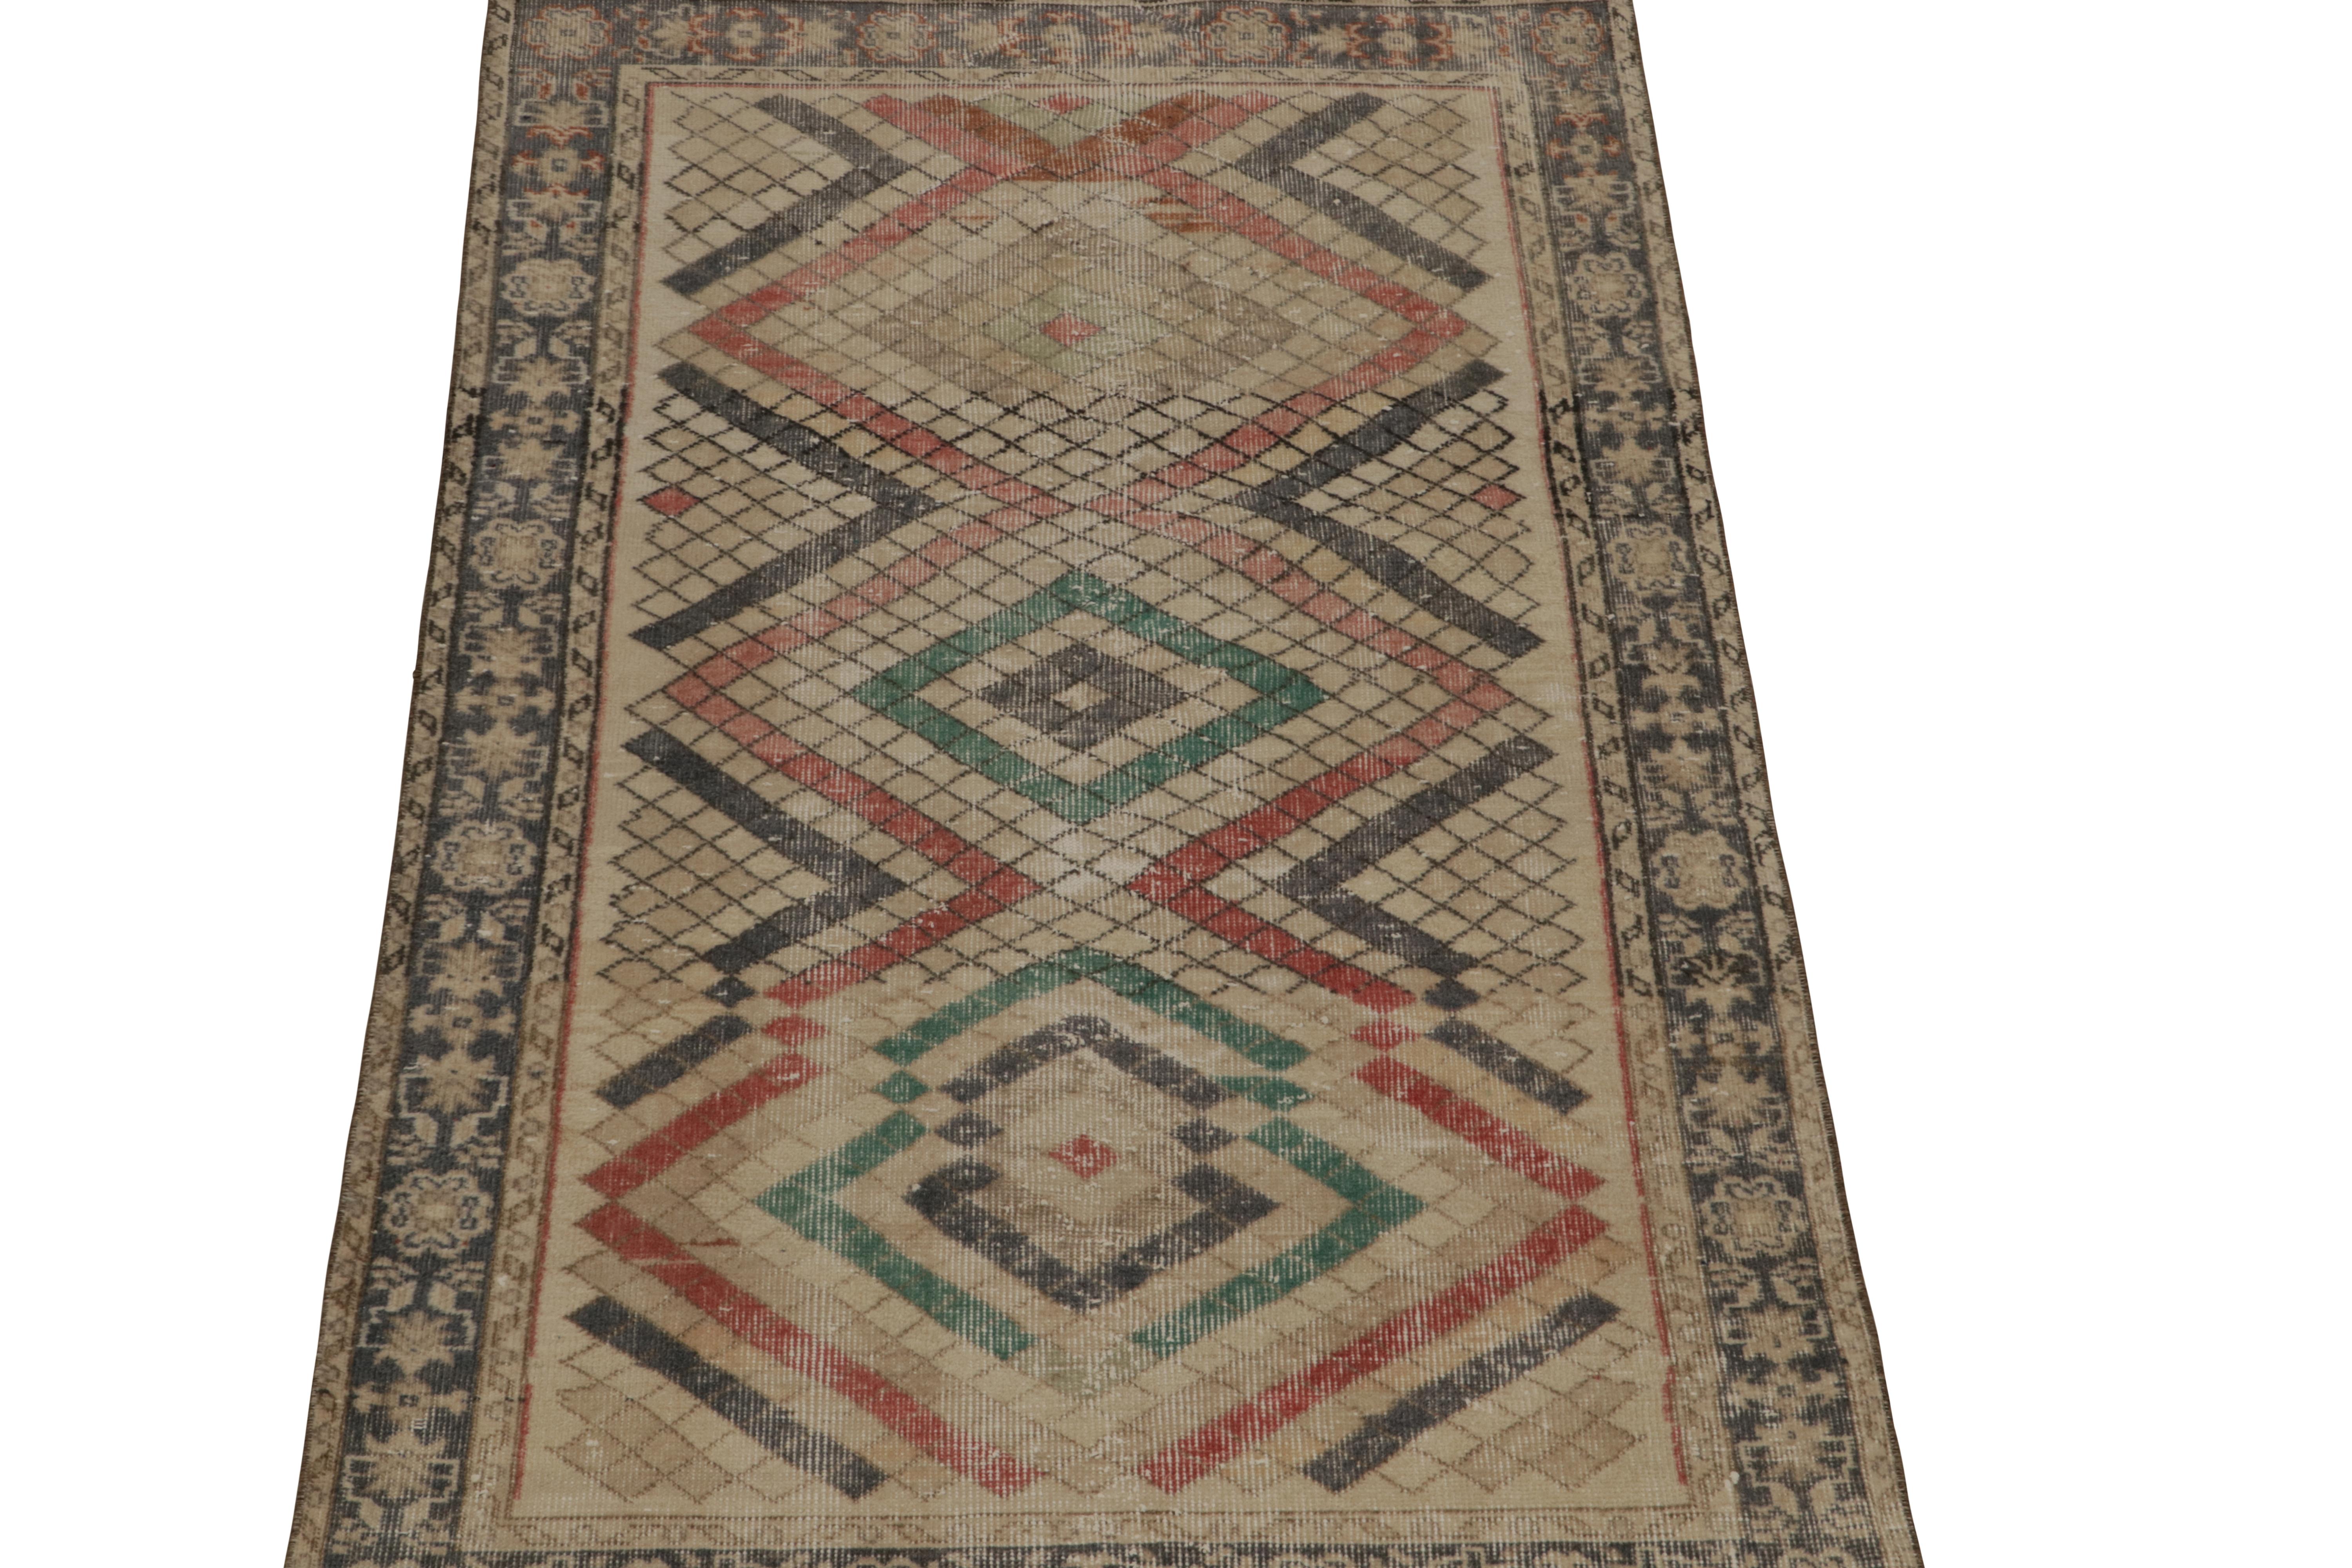 This vintage 3x6 runner is a new addition to Rug & Kilim’s commemorative Mid-Century Pasha Collection. This line is a commemoration of rare curations we believe to hail from multidisciplinary Turkish designer Zeki Müren.

Further on the